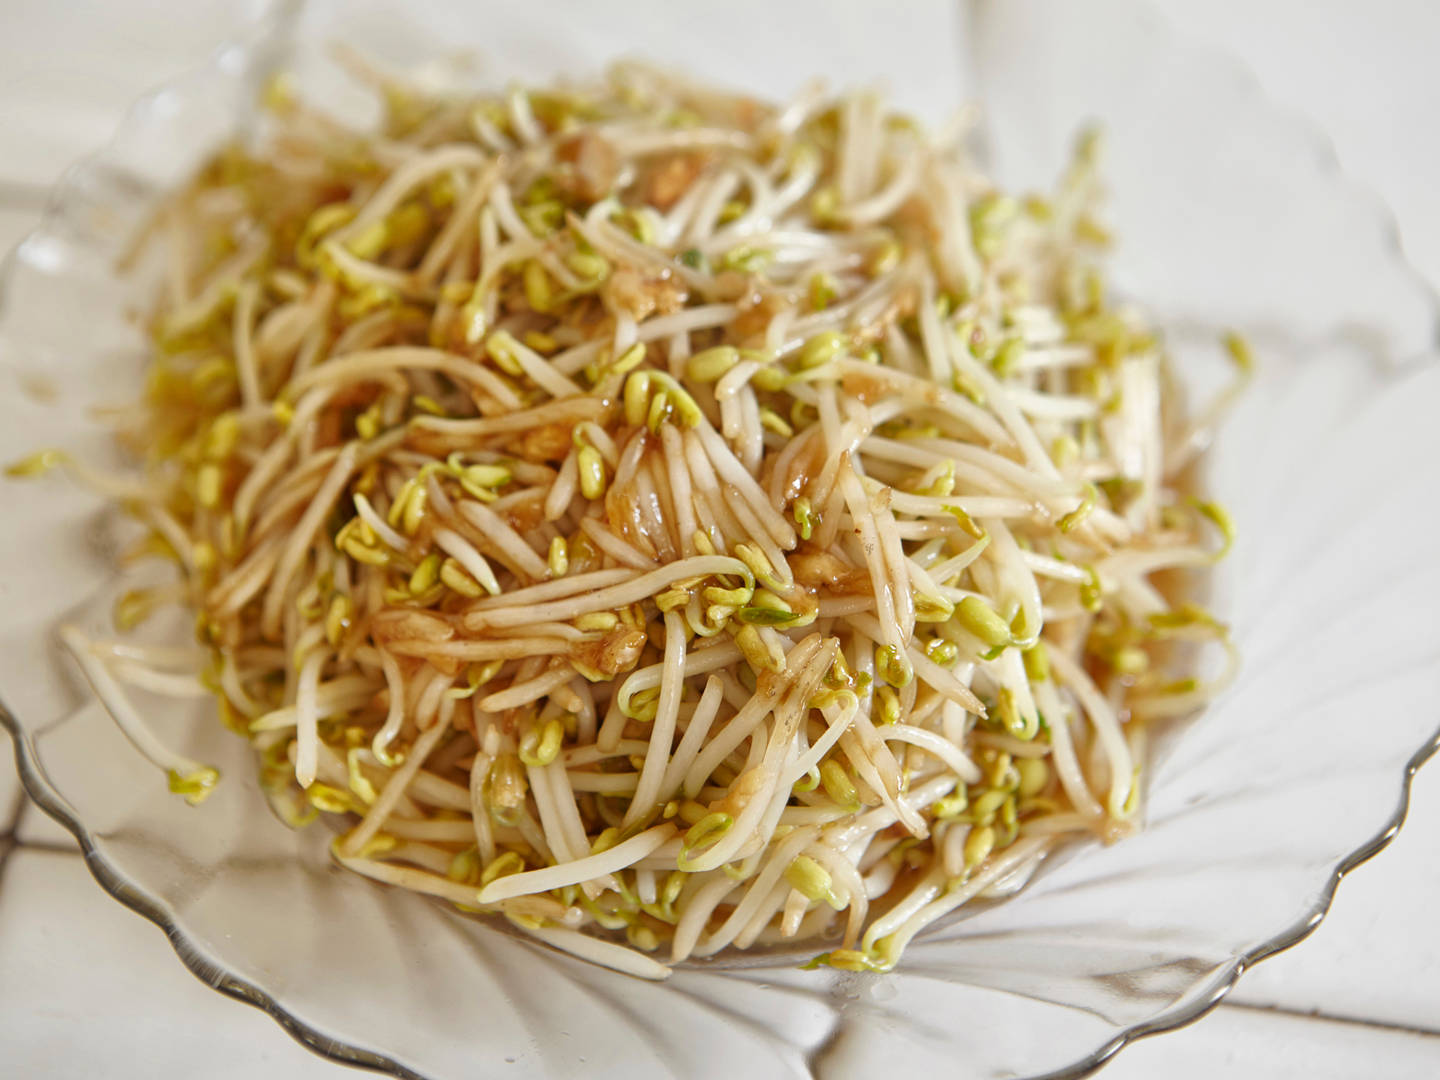 Nutritious Stir-fried Mung Bean Sprouts Vegetable Picture